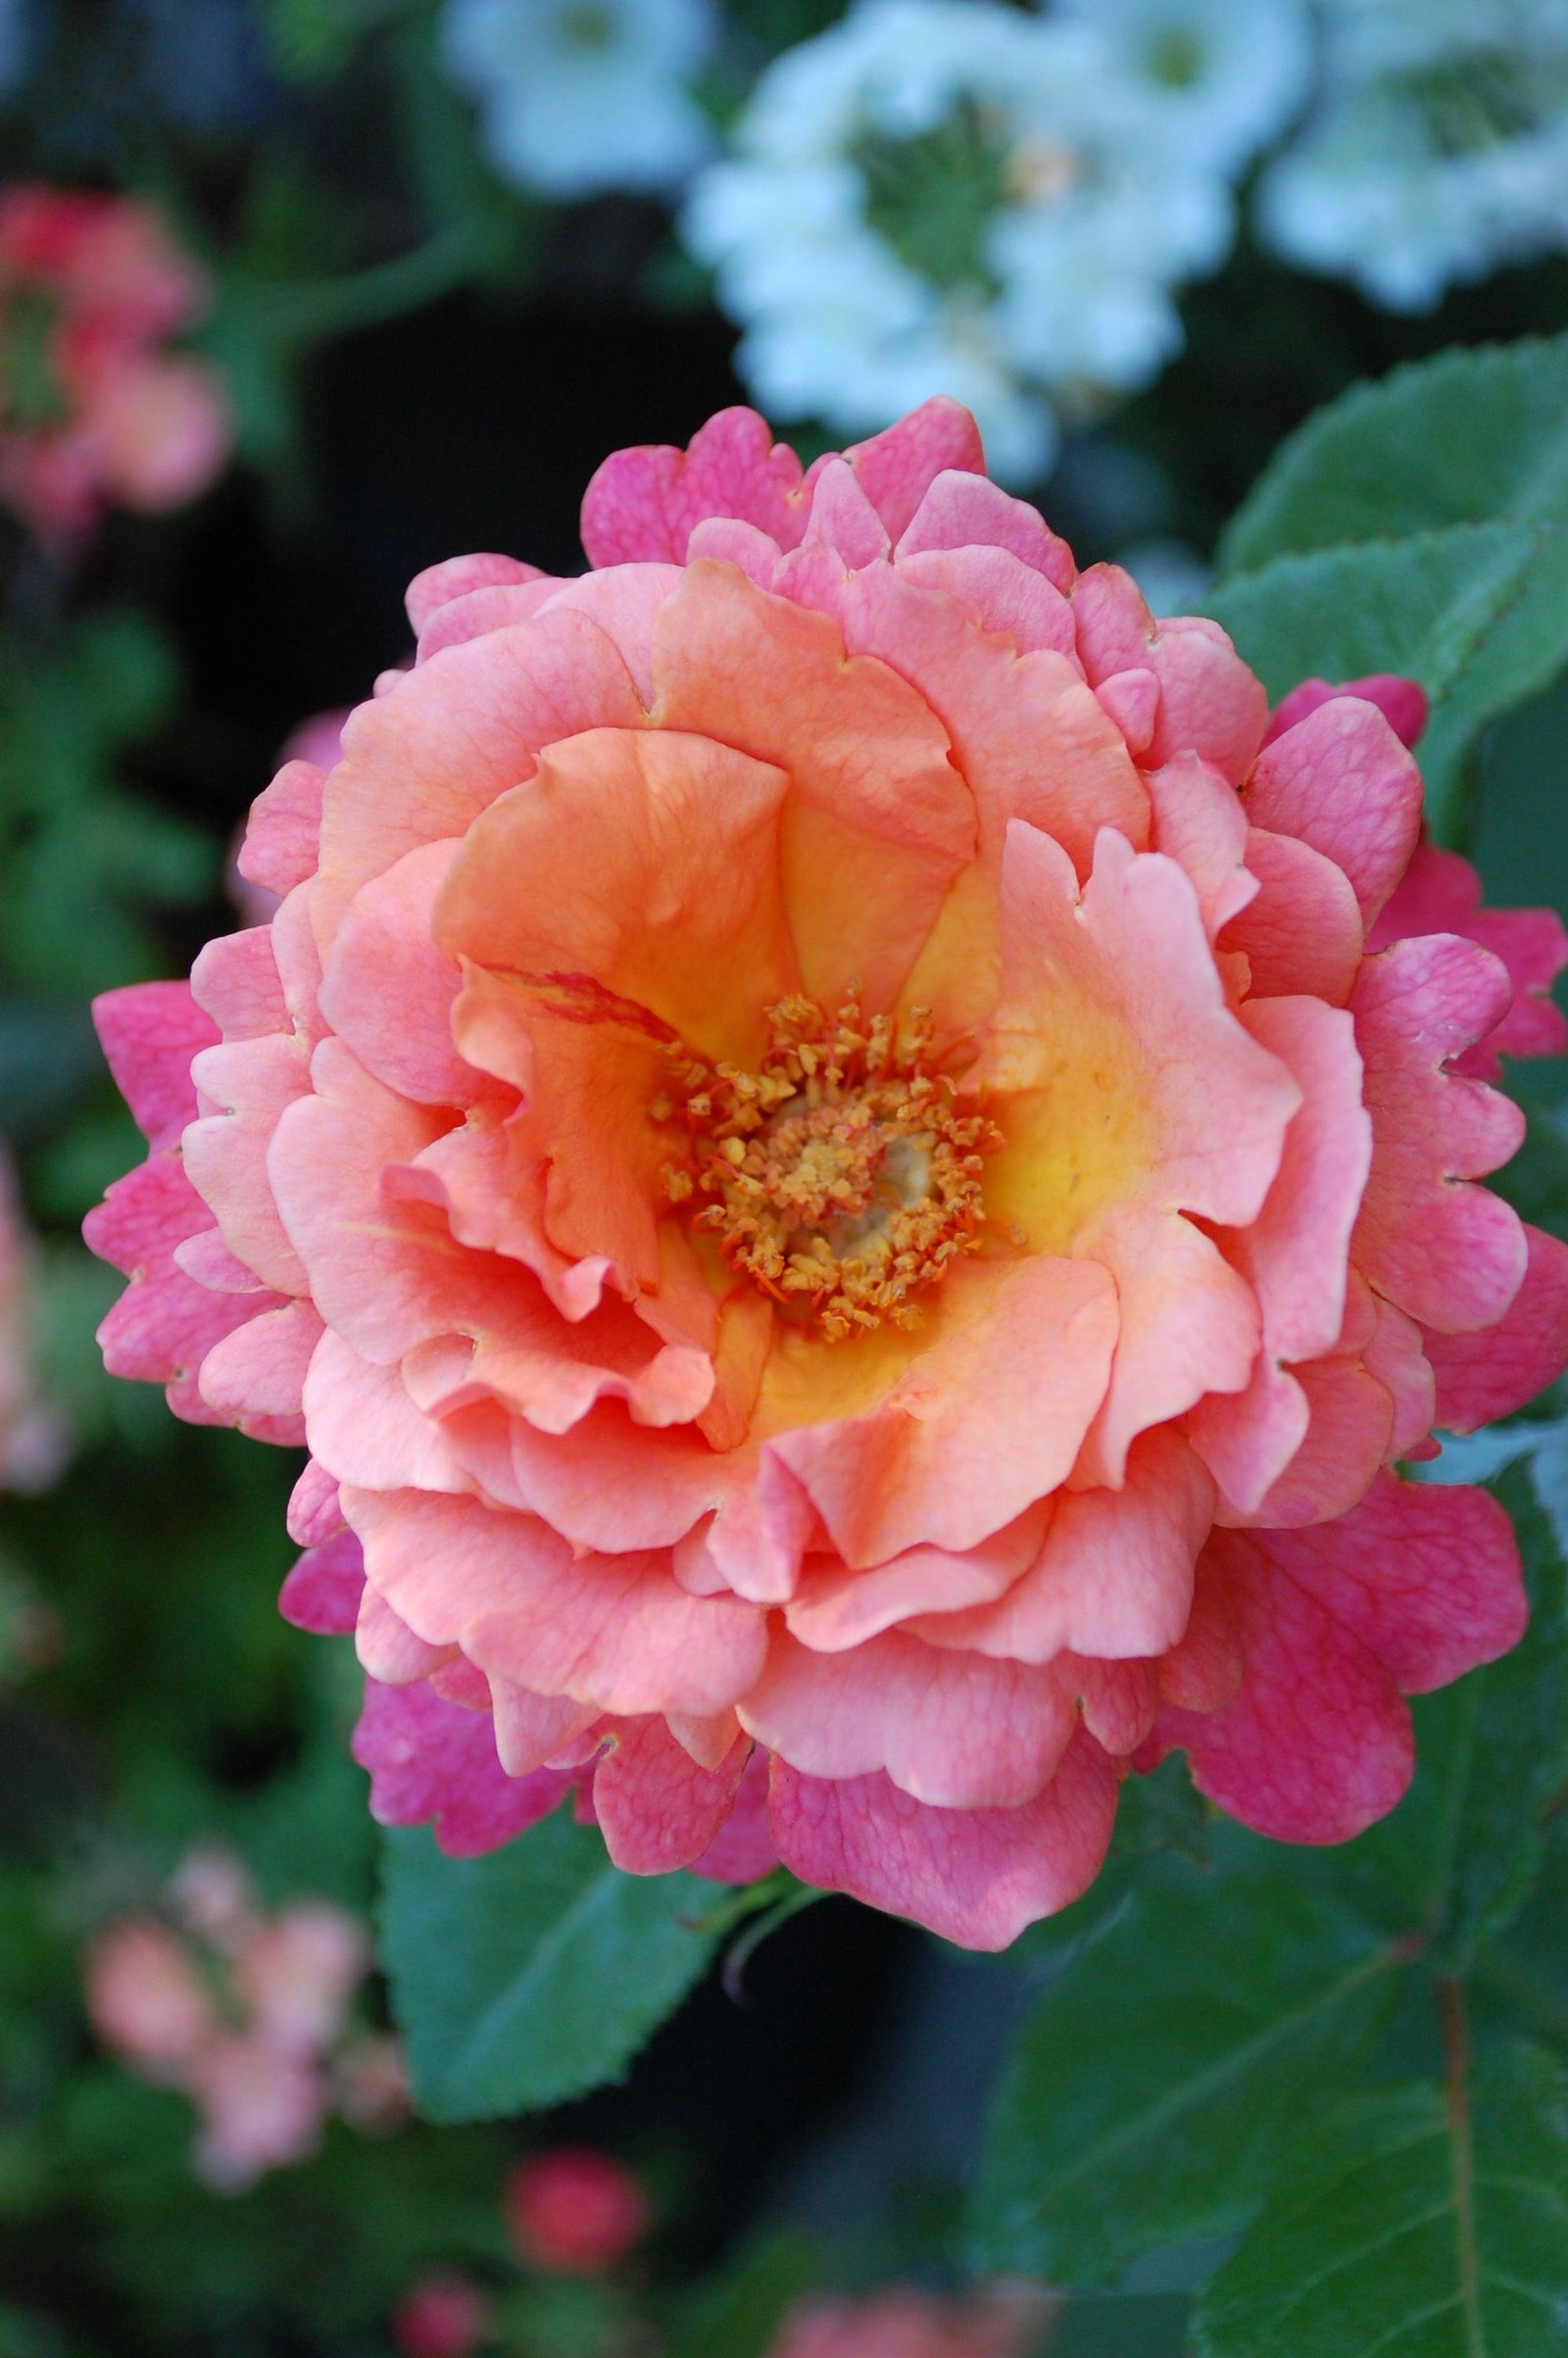 This remarkable rose variety showcases shades of mango orange, peach, and apricot, contrasting deep green foliage. This variety is also has exceptional disease resistance, ensuring its health and longevity. Ideal for zones 5-9, spreads 90cm-120cm. 